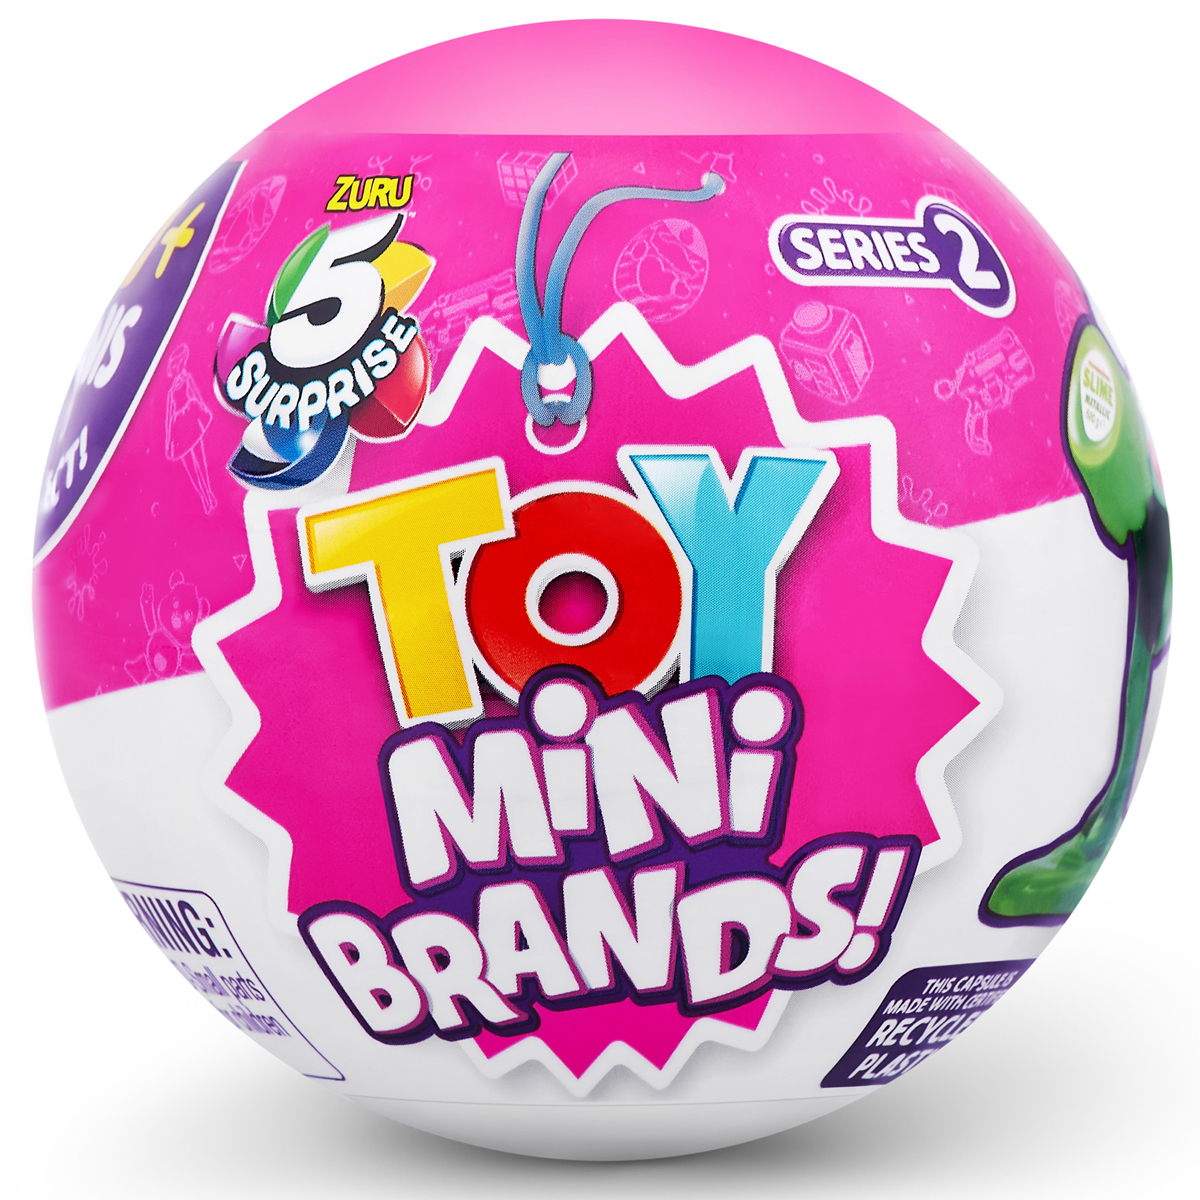 Toy Mini Brands Series 2 Capsule Collectible Toy By ZURU